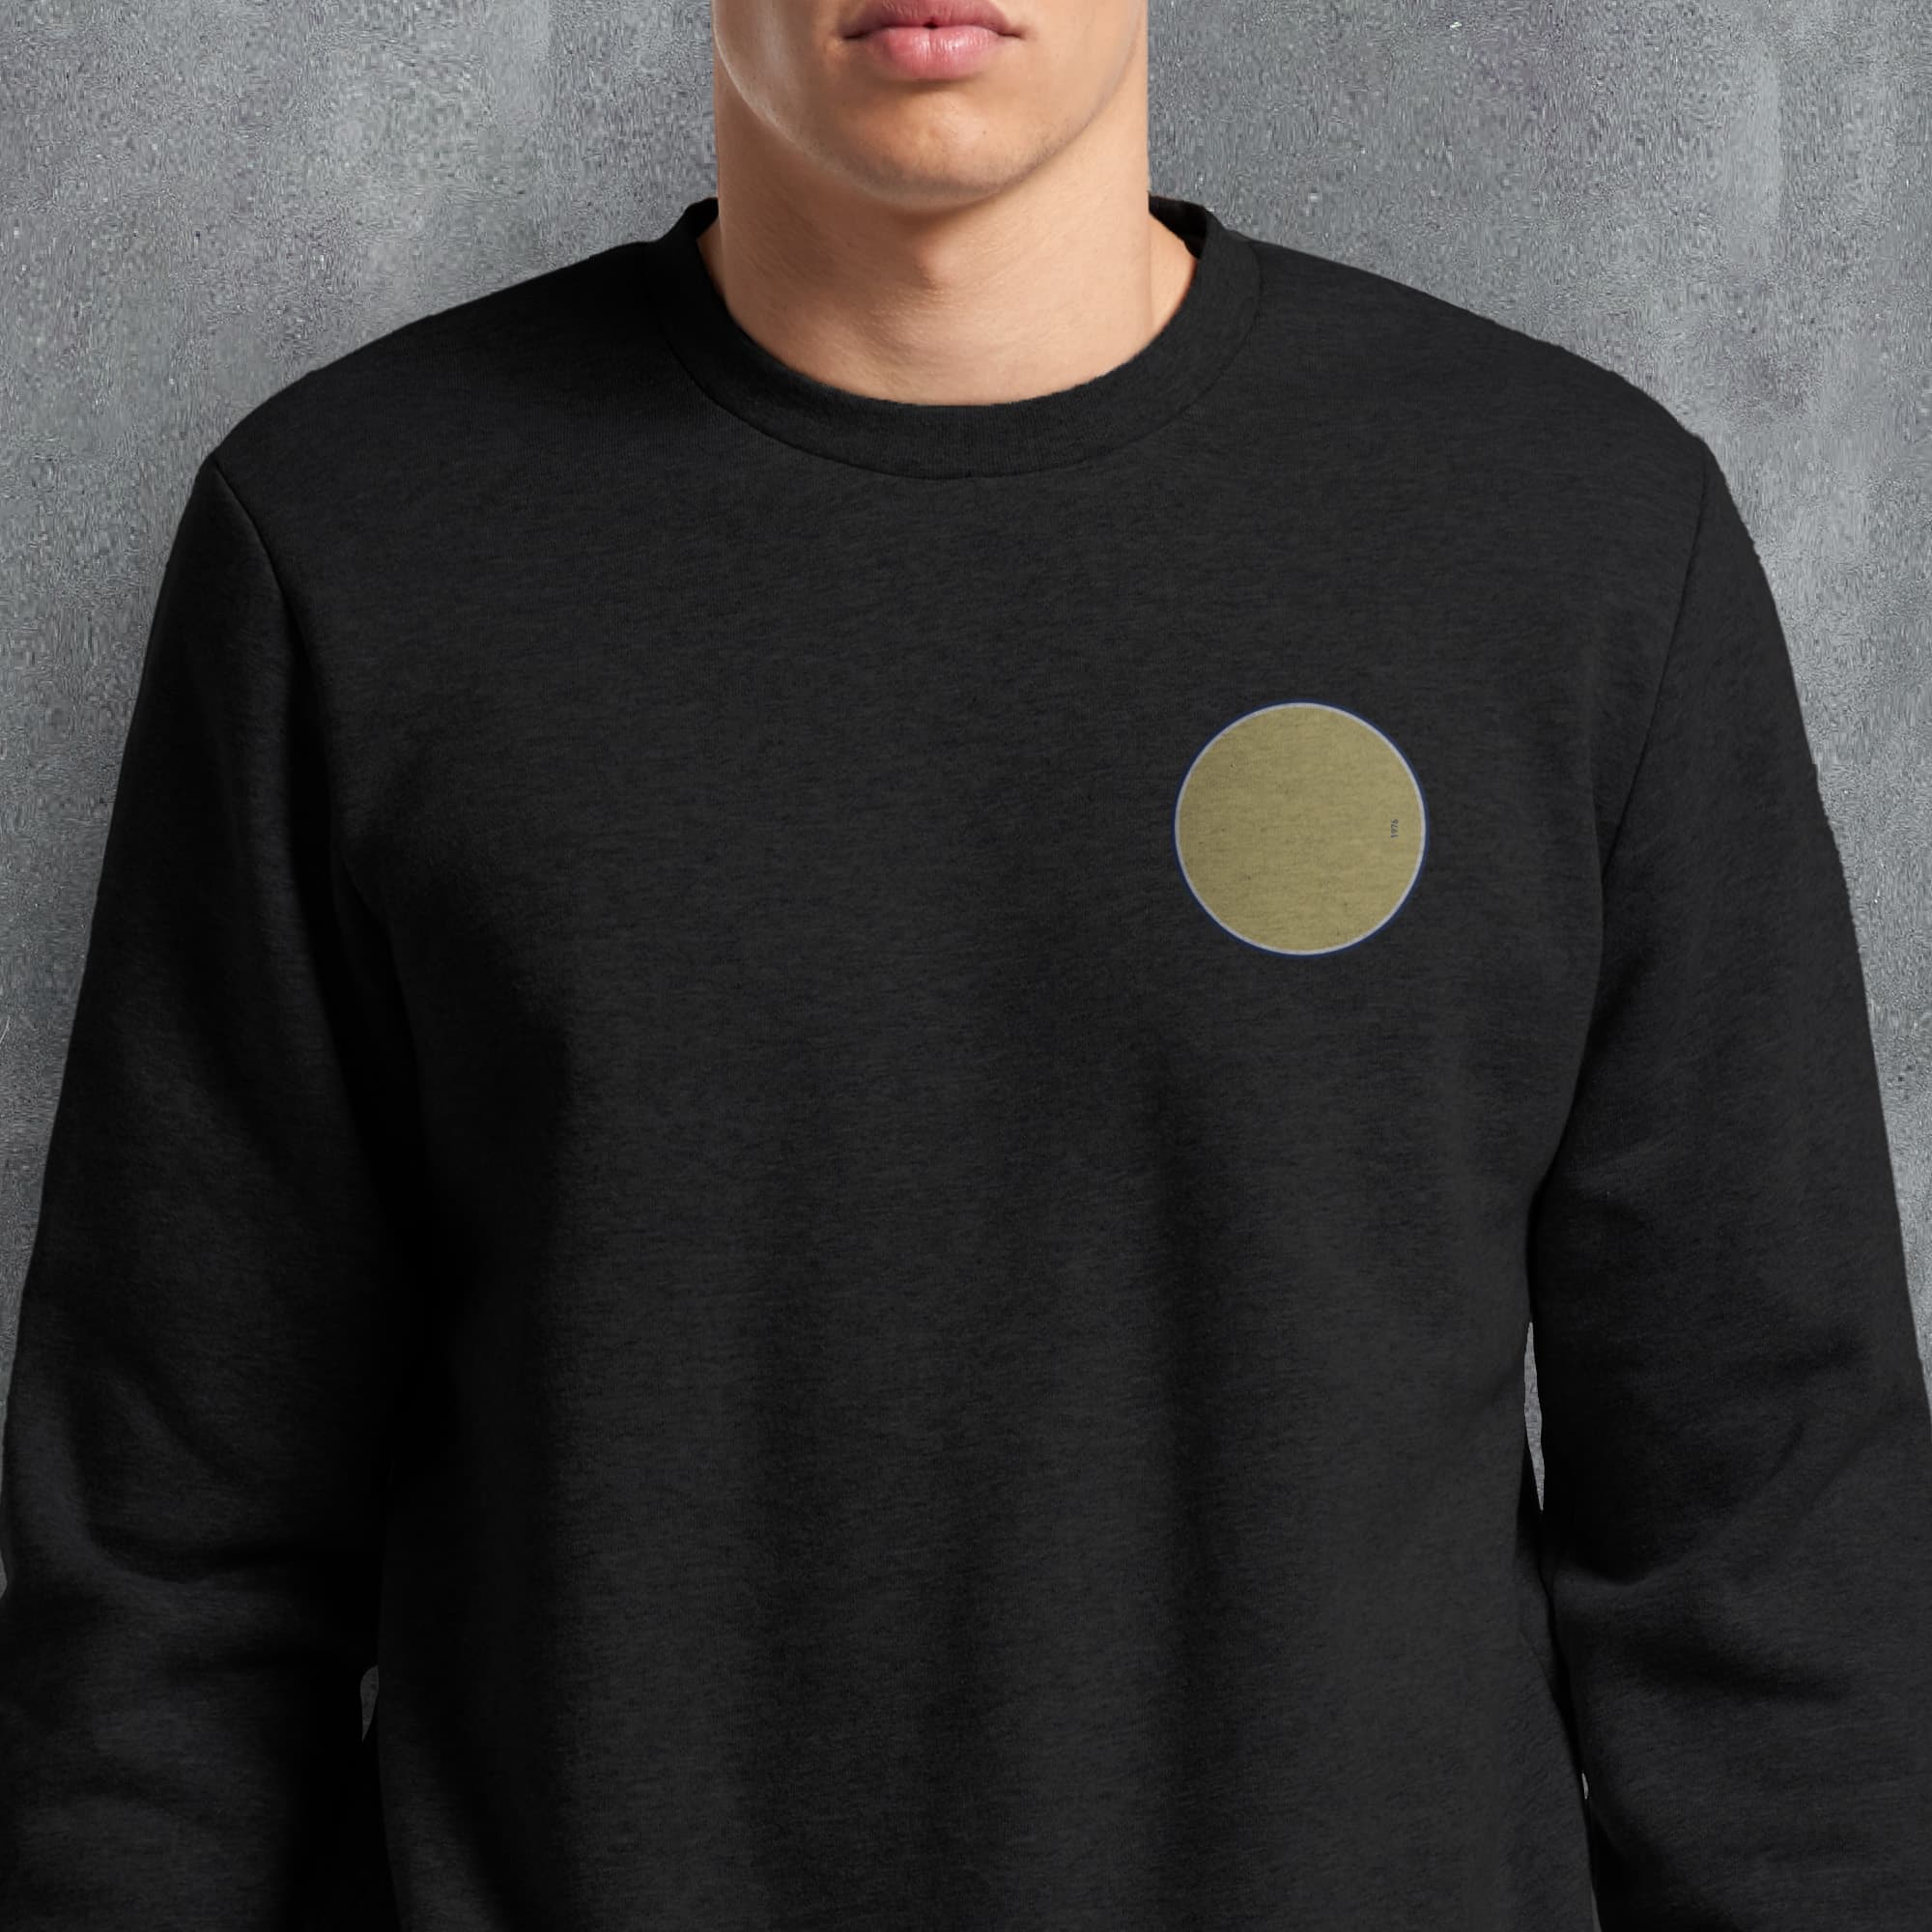 a man wearing a black sweatshirt with a gold circle on it